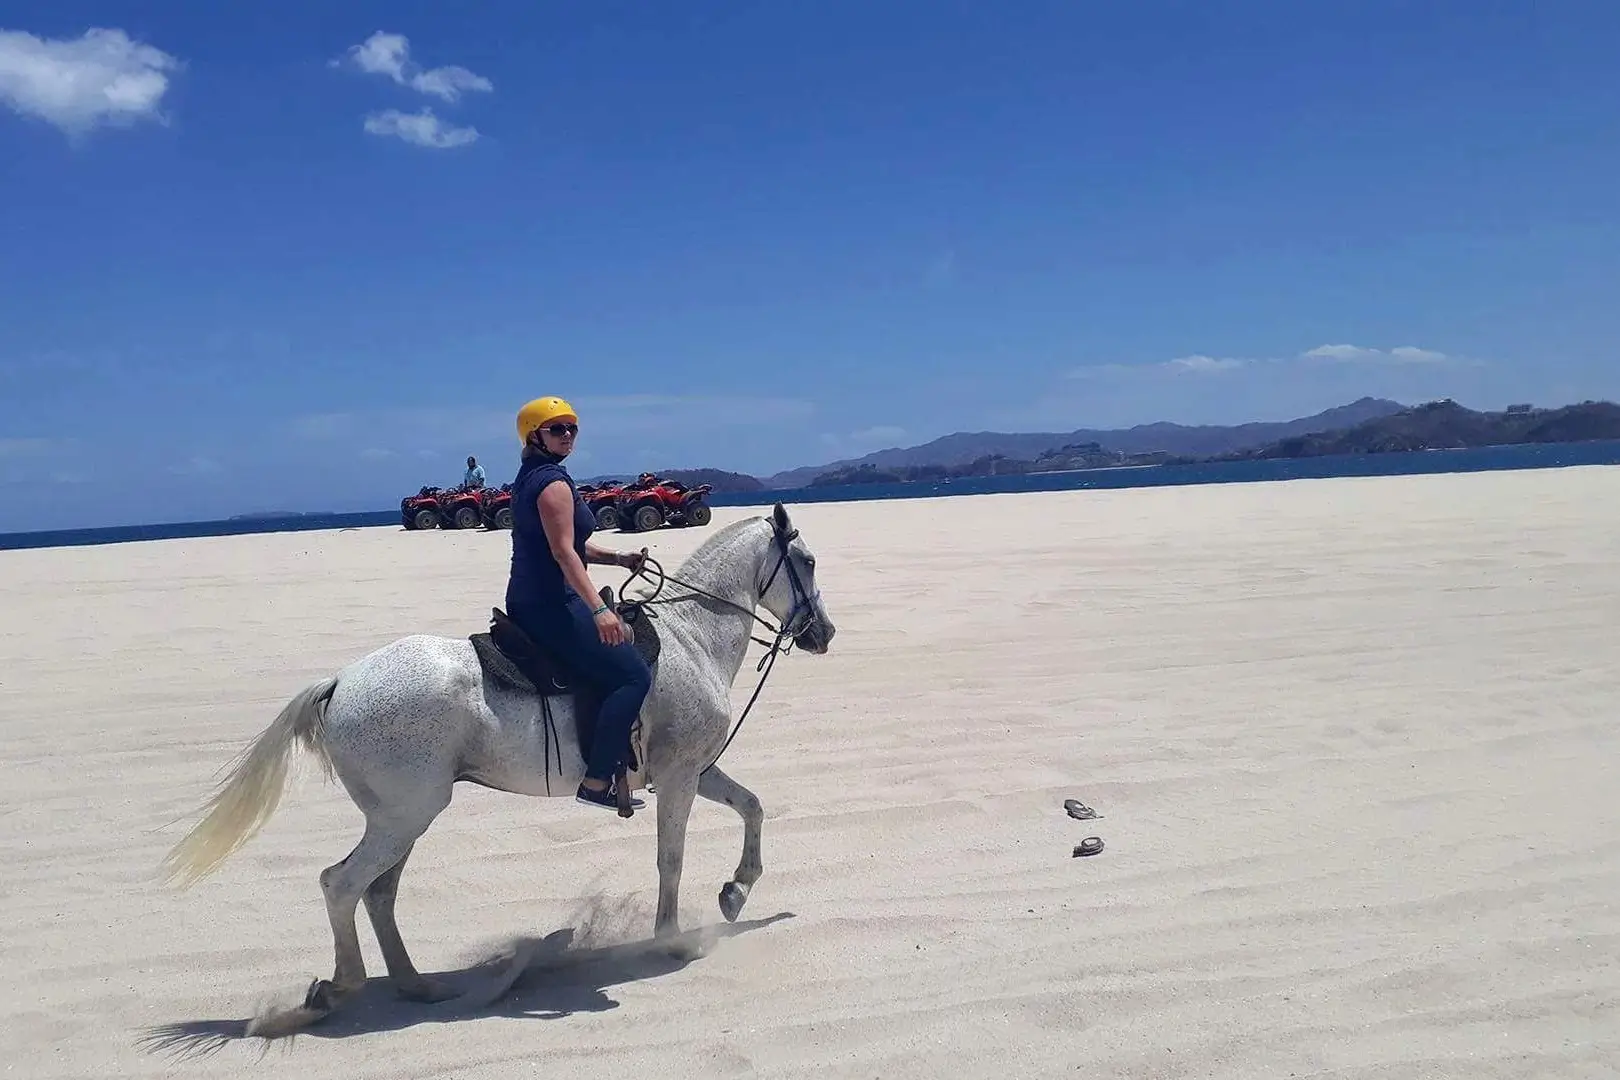 Image of a woman wearing a helmet and horseback riding on the stunning Conchal Beach. The blue ocean can be seen in the background, with clear skies and white sand creating a picturesque setting.